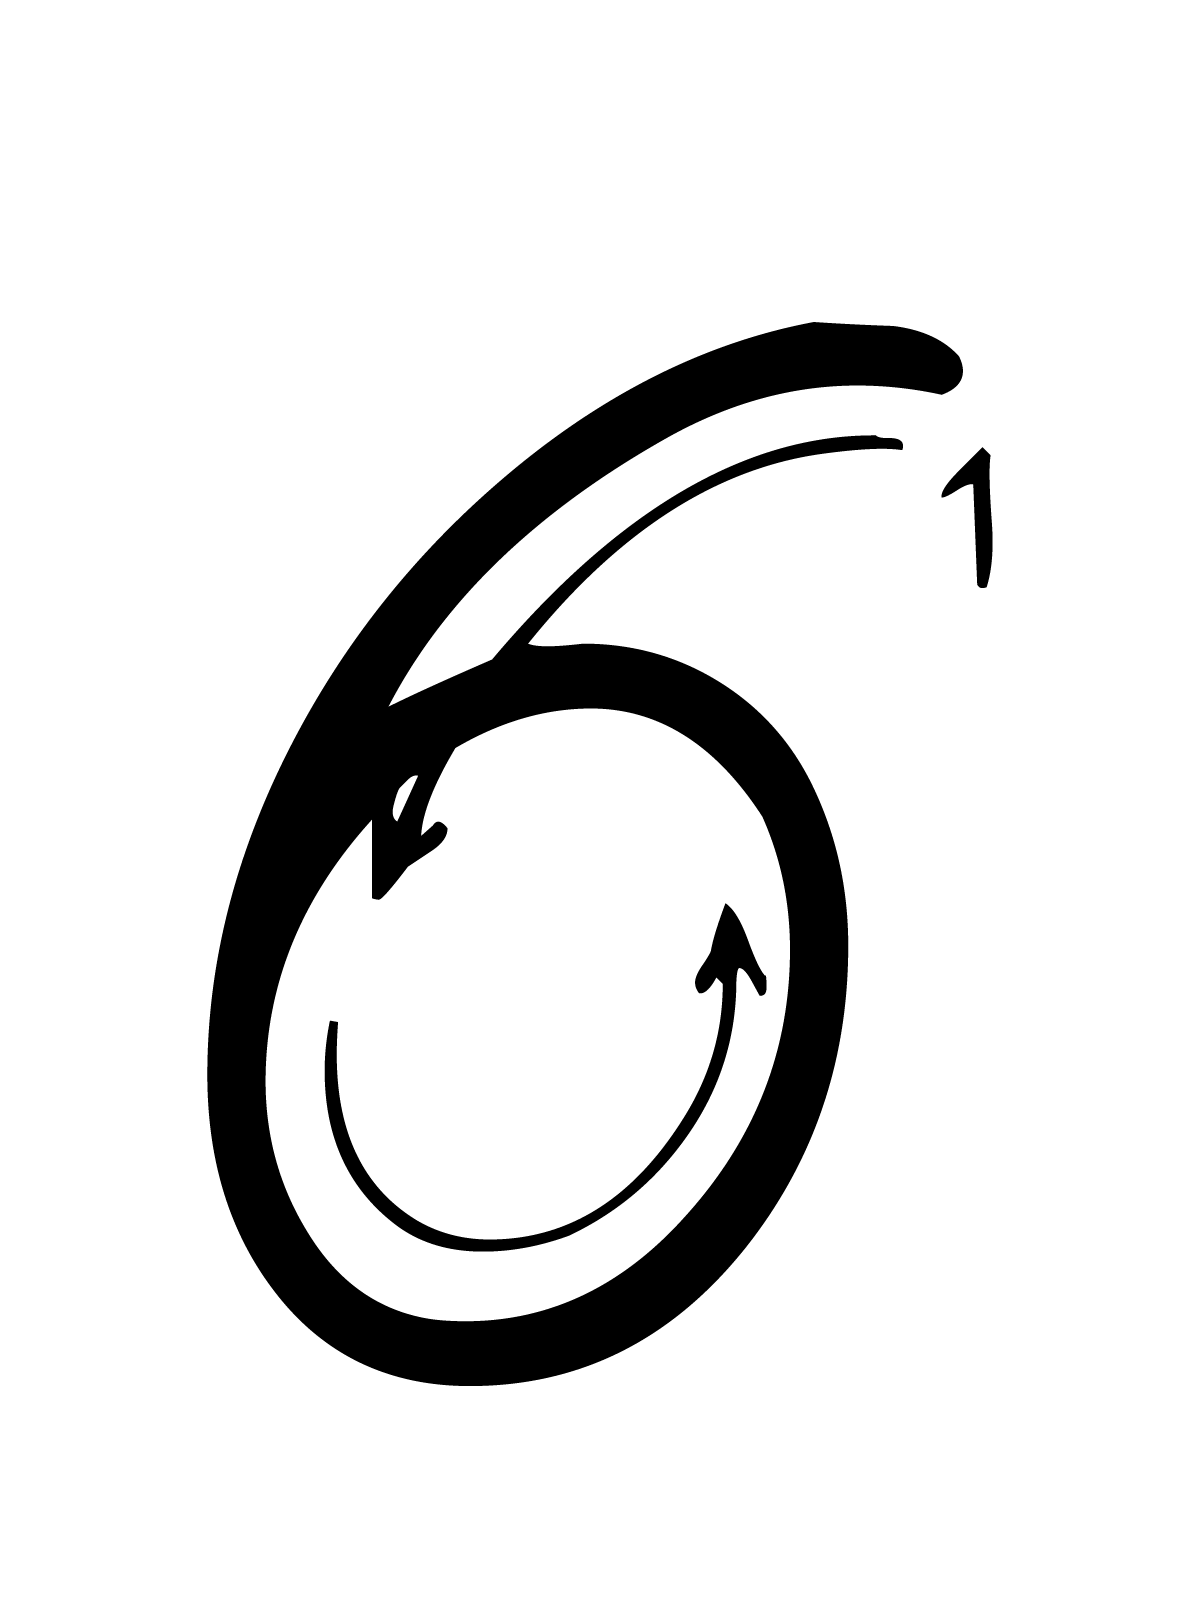 Letters and numbers - Number 6 (six) with indications cursive movement